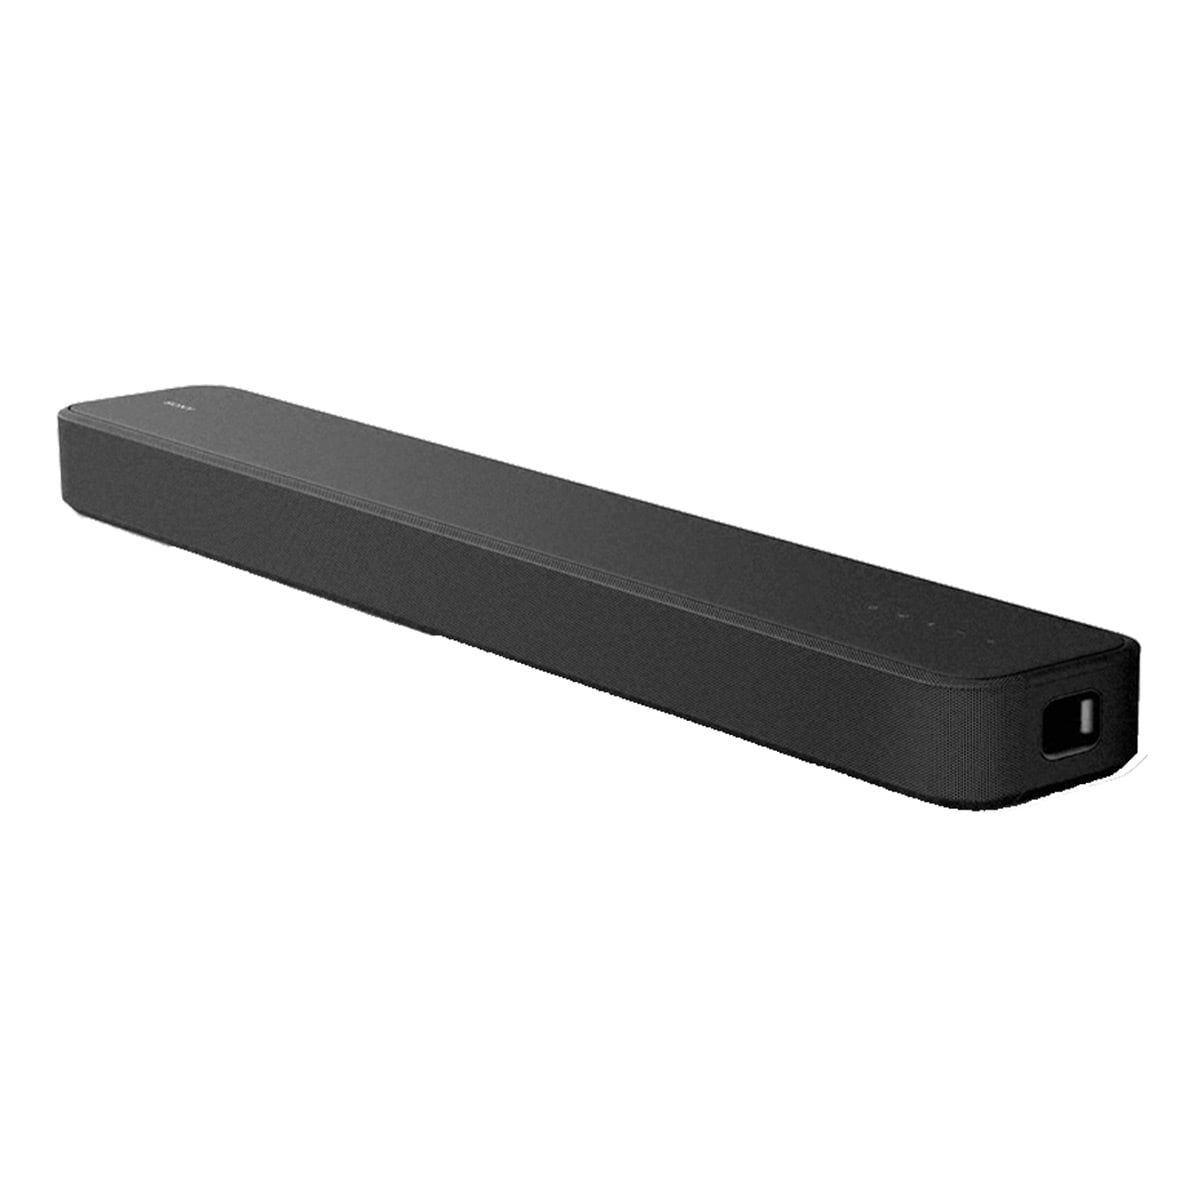 Soundbar with Subwoofer Atmos Dual HT-S2000 Dolby Built-In 3.1ch Sony